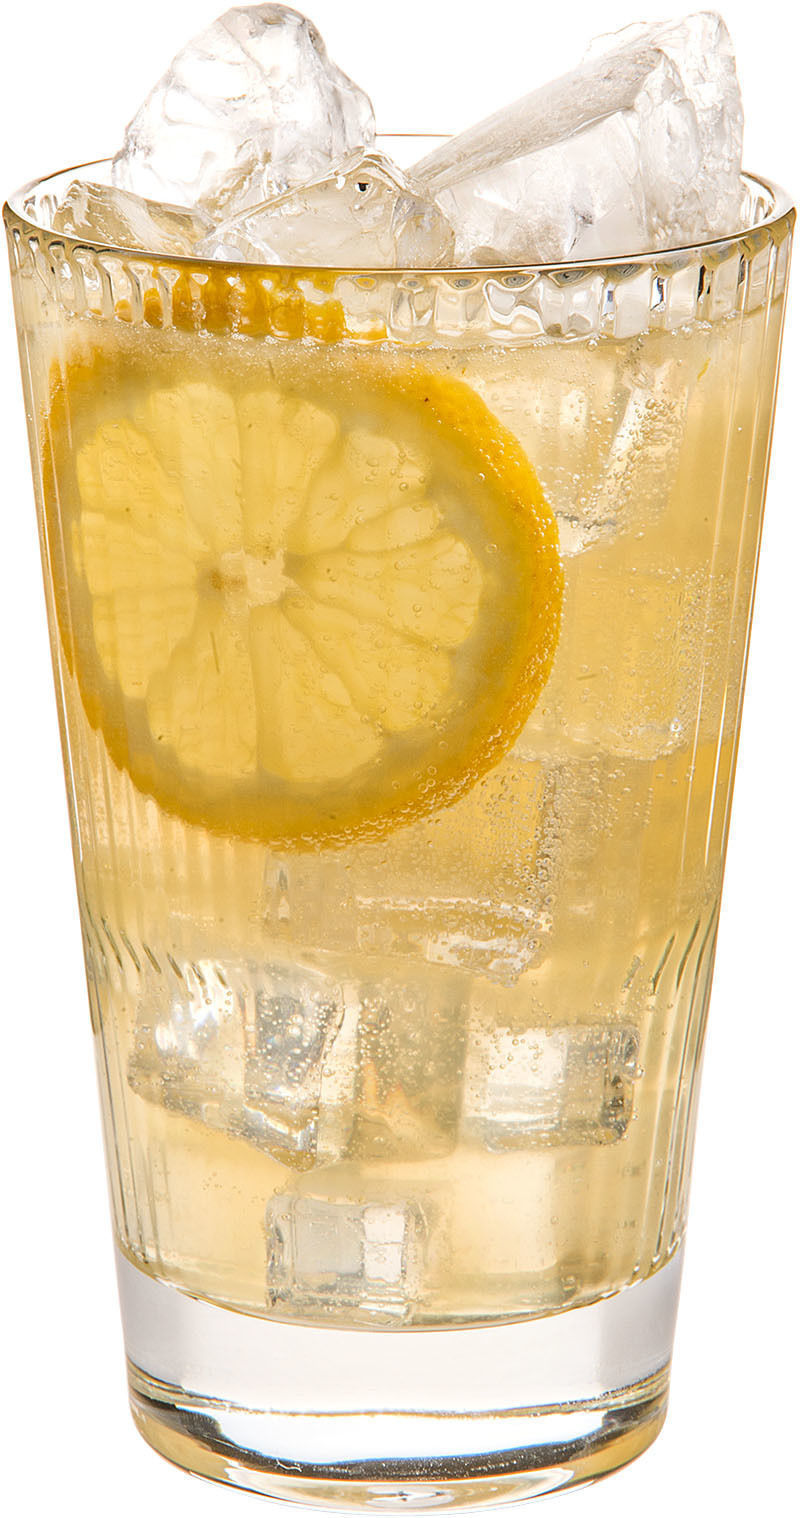 How to Make the Citrus Highball